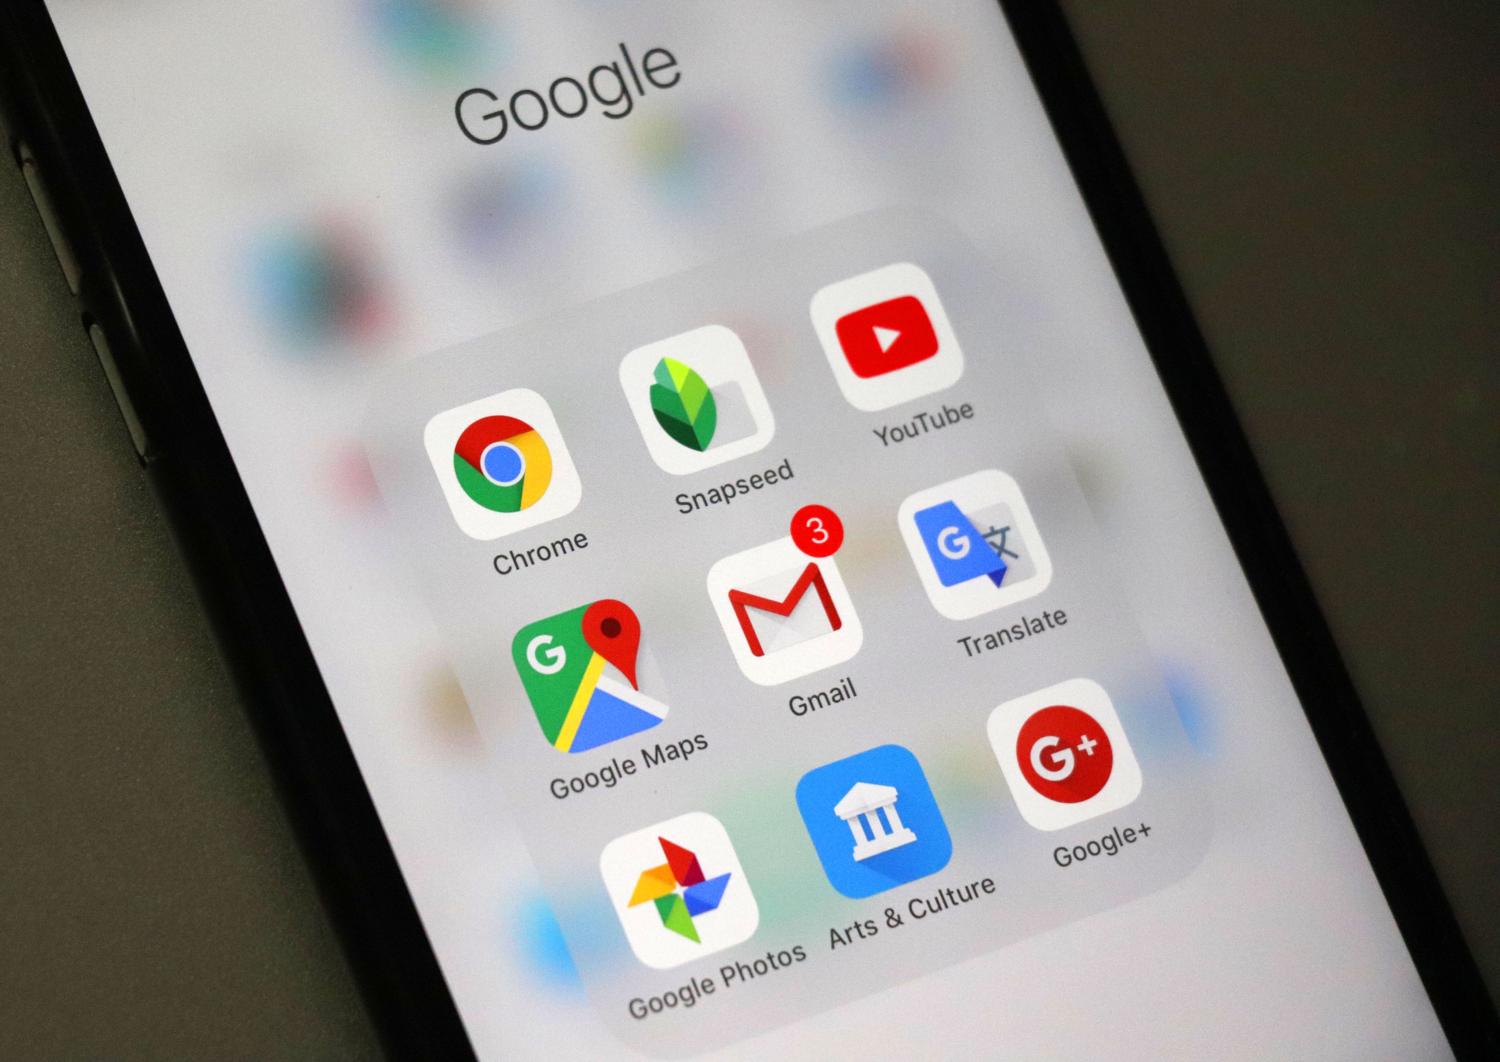 A mobile phone user looks at the icons of the mobile apps of Alphabet Inc's Google on his smartphone in Beijing, China, 16 January 2018.Alphabet Inc's Google said on Tuesday (16 January 2018) it has made "no changes" to its mapping platform in China, denying an earlier media report that claimed it was re-launching the function in China, where many of its services are blocked. Japan's Nikkei reported earlier that Google had set up a China-specific version of the Google Maps website for the first time in eight years and introduced a map application for Chinese iPhones for the first time. Google, however, stated that the Google Maps browser has been available in China for many years while there is no Maps application offered in the country.No Use China. No Use France.